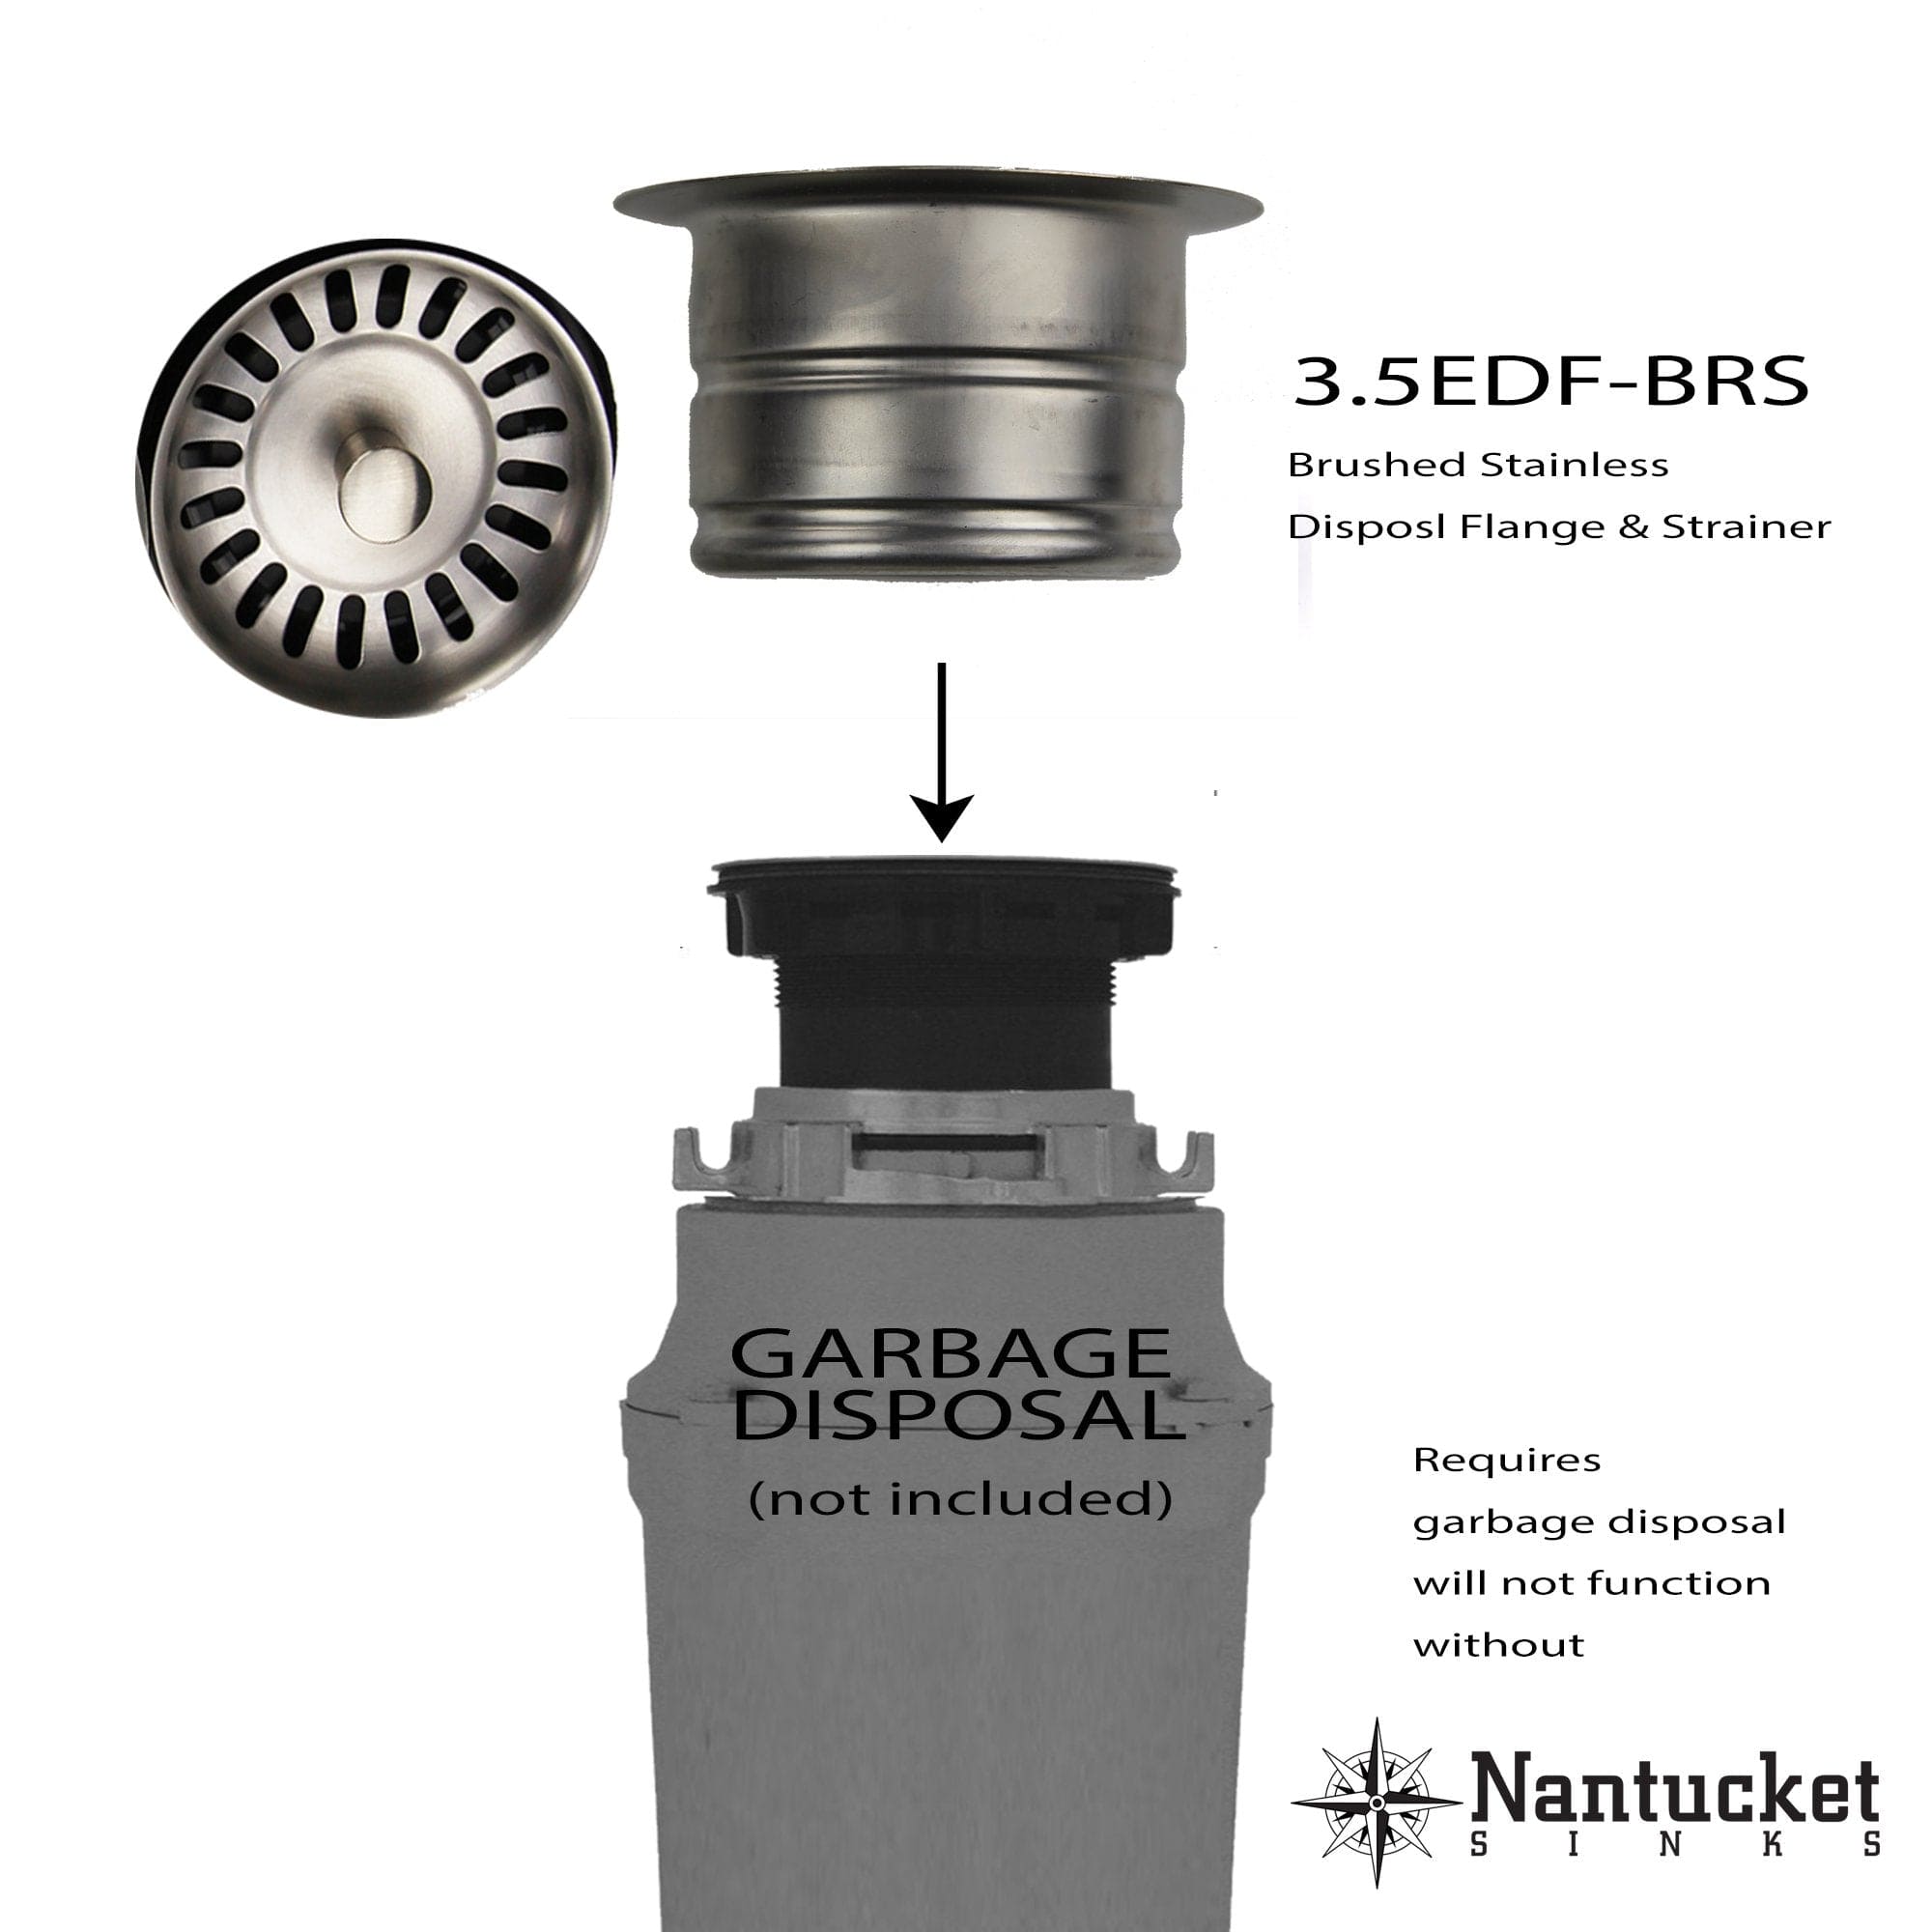 Nantucket 3.5" Extended Flange Disposal Kitchen Drain in Brushed Stainless - 3.5EDF-BRS